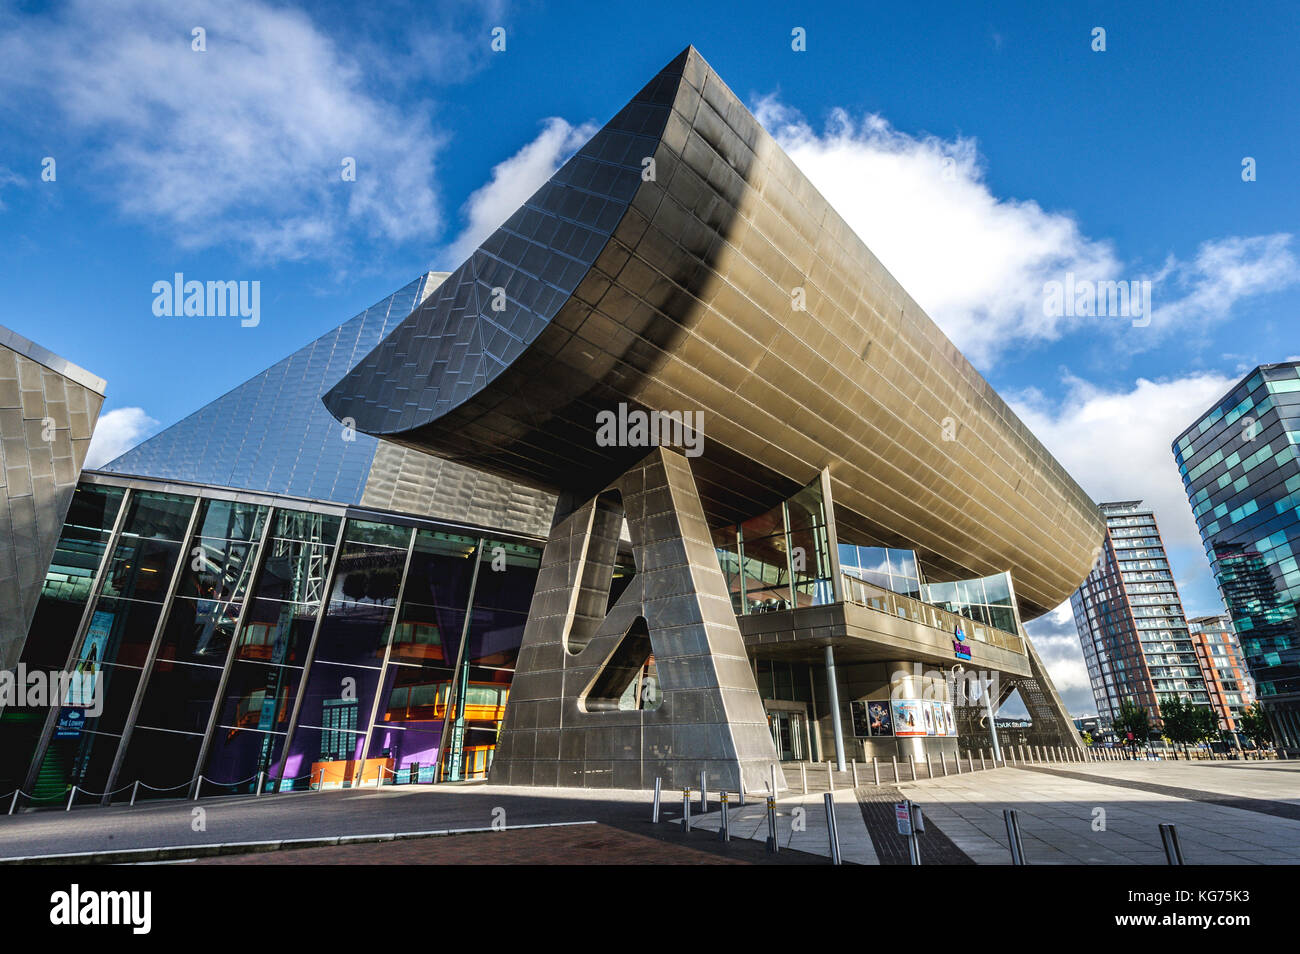 Exterior view of the Lowry Theatre complex in Salford, Lancashire Stock Photo